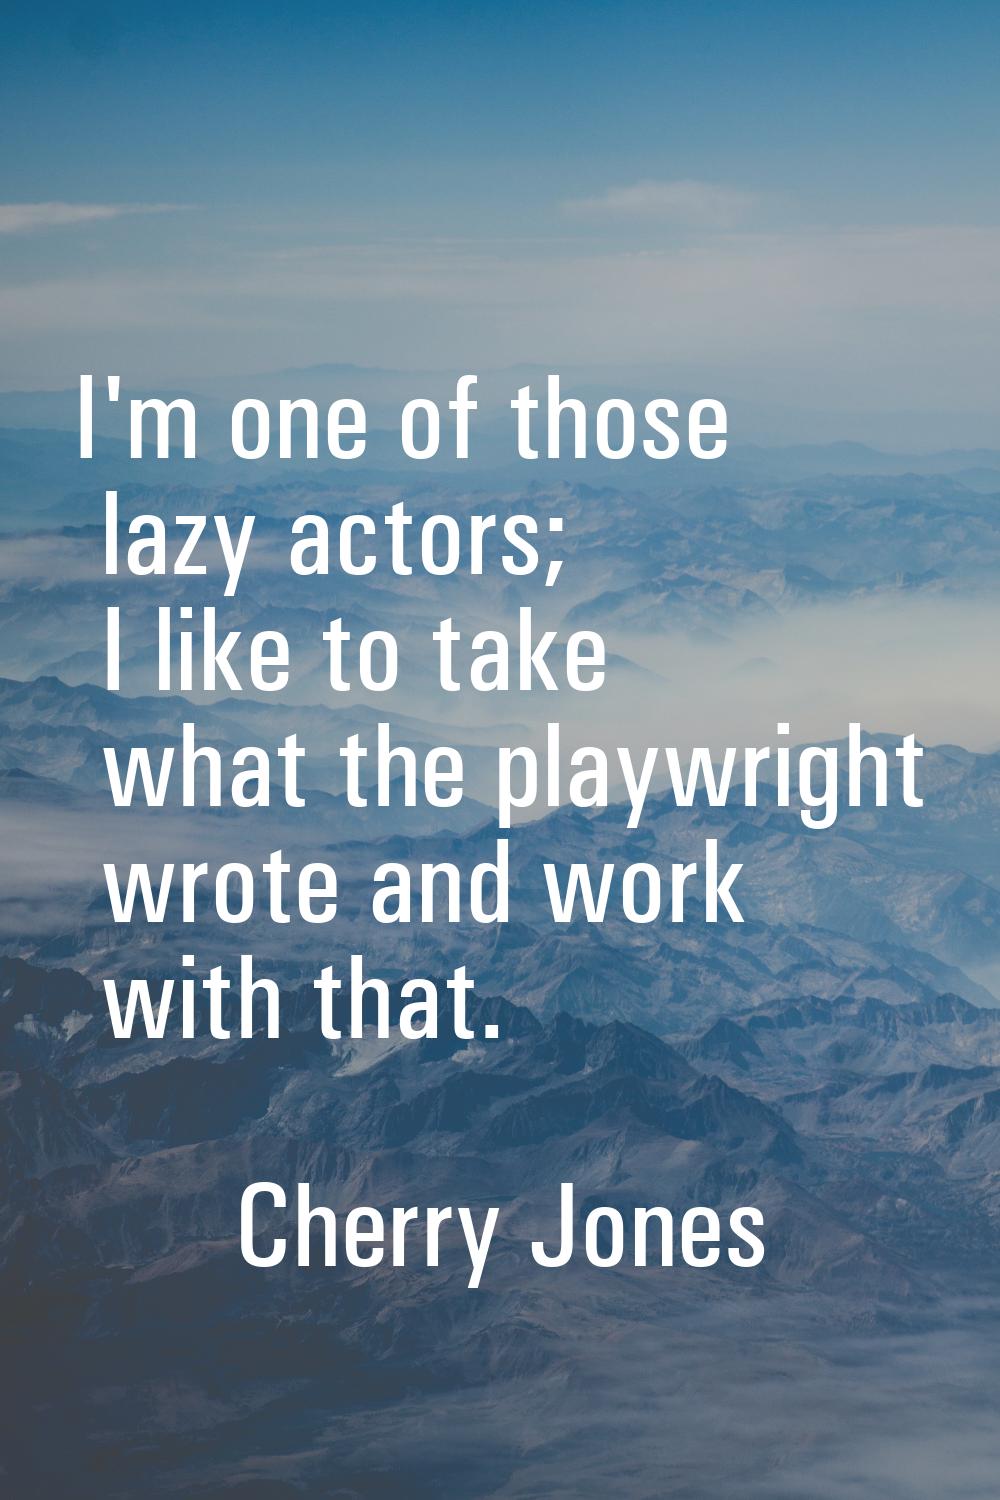 I'm one of those lazy actors; I like to take what the playwright wrote and work with that.